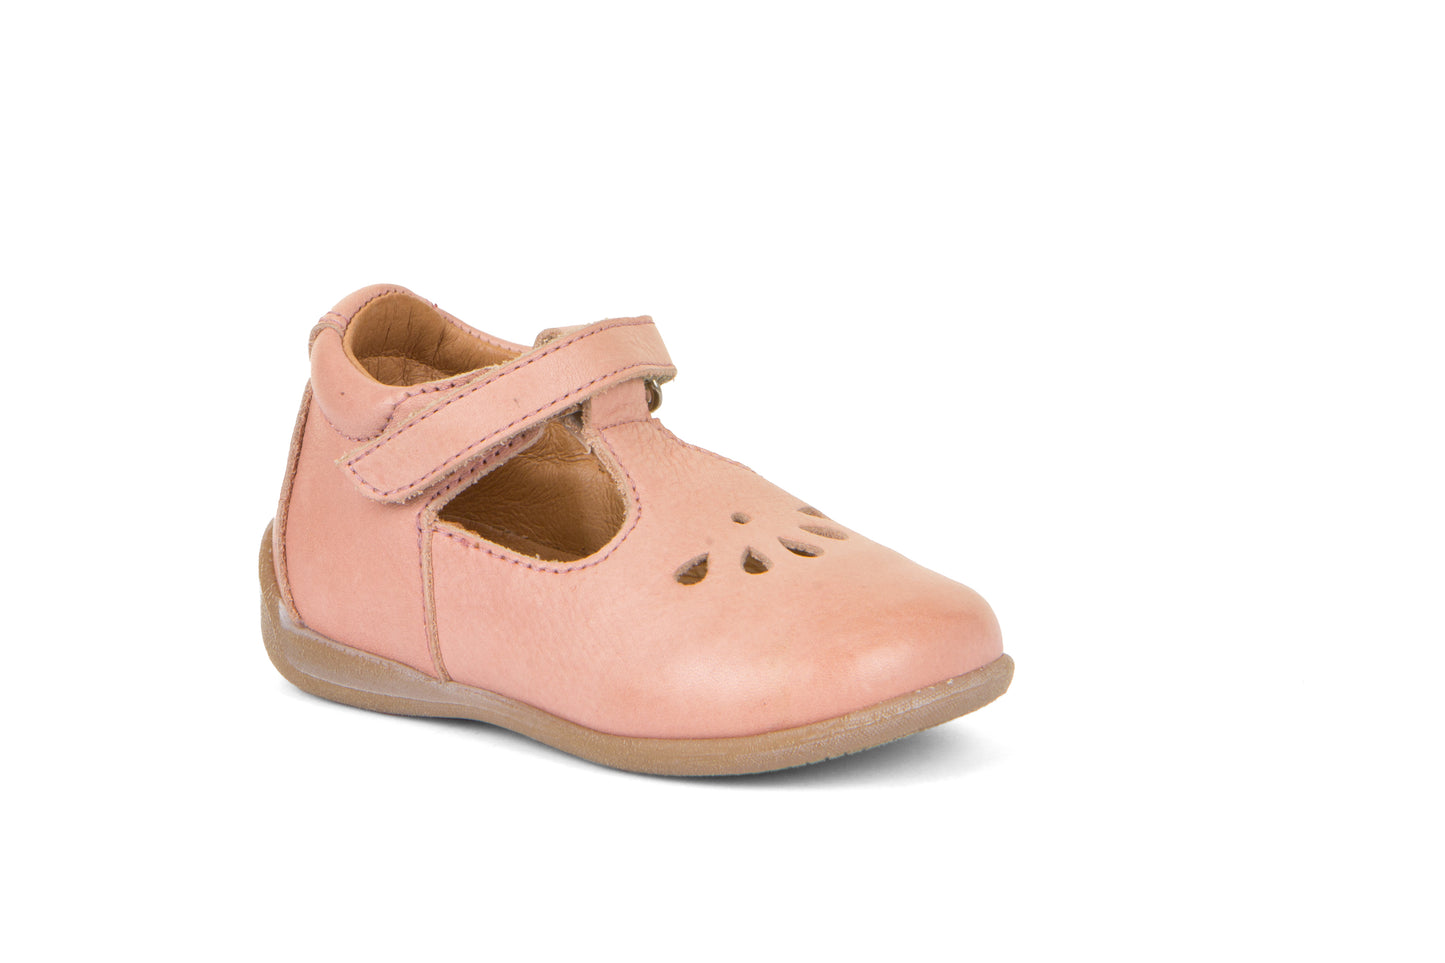 A girls shoe by Froddo, style G2140060-2 Gigi T-bar, in nude with teardrop cut out design, velcro fastening. Angled view.